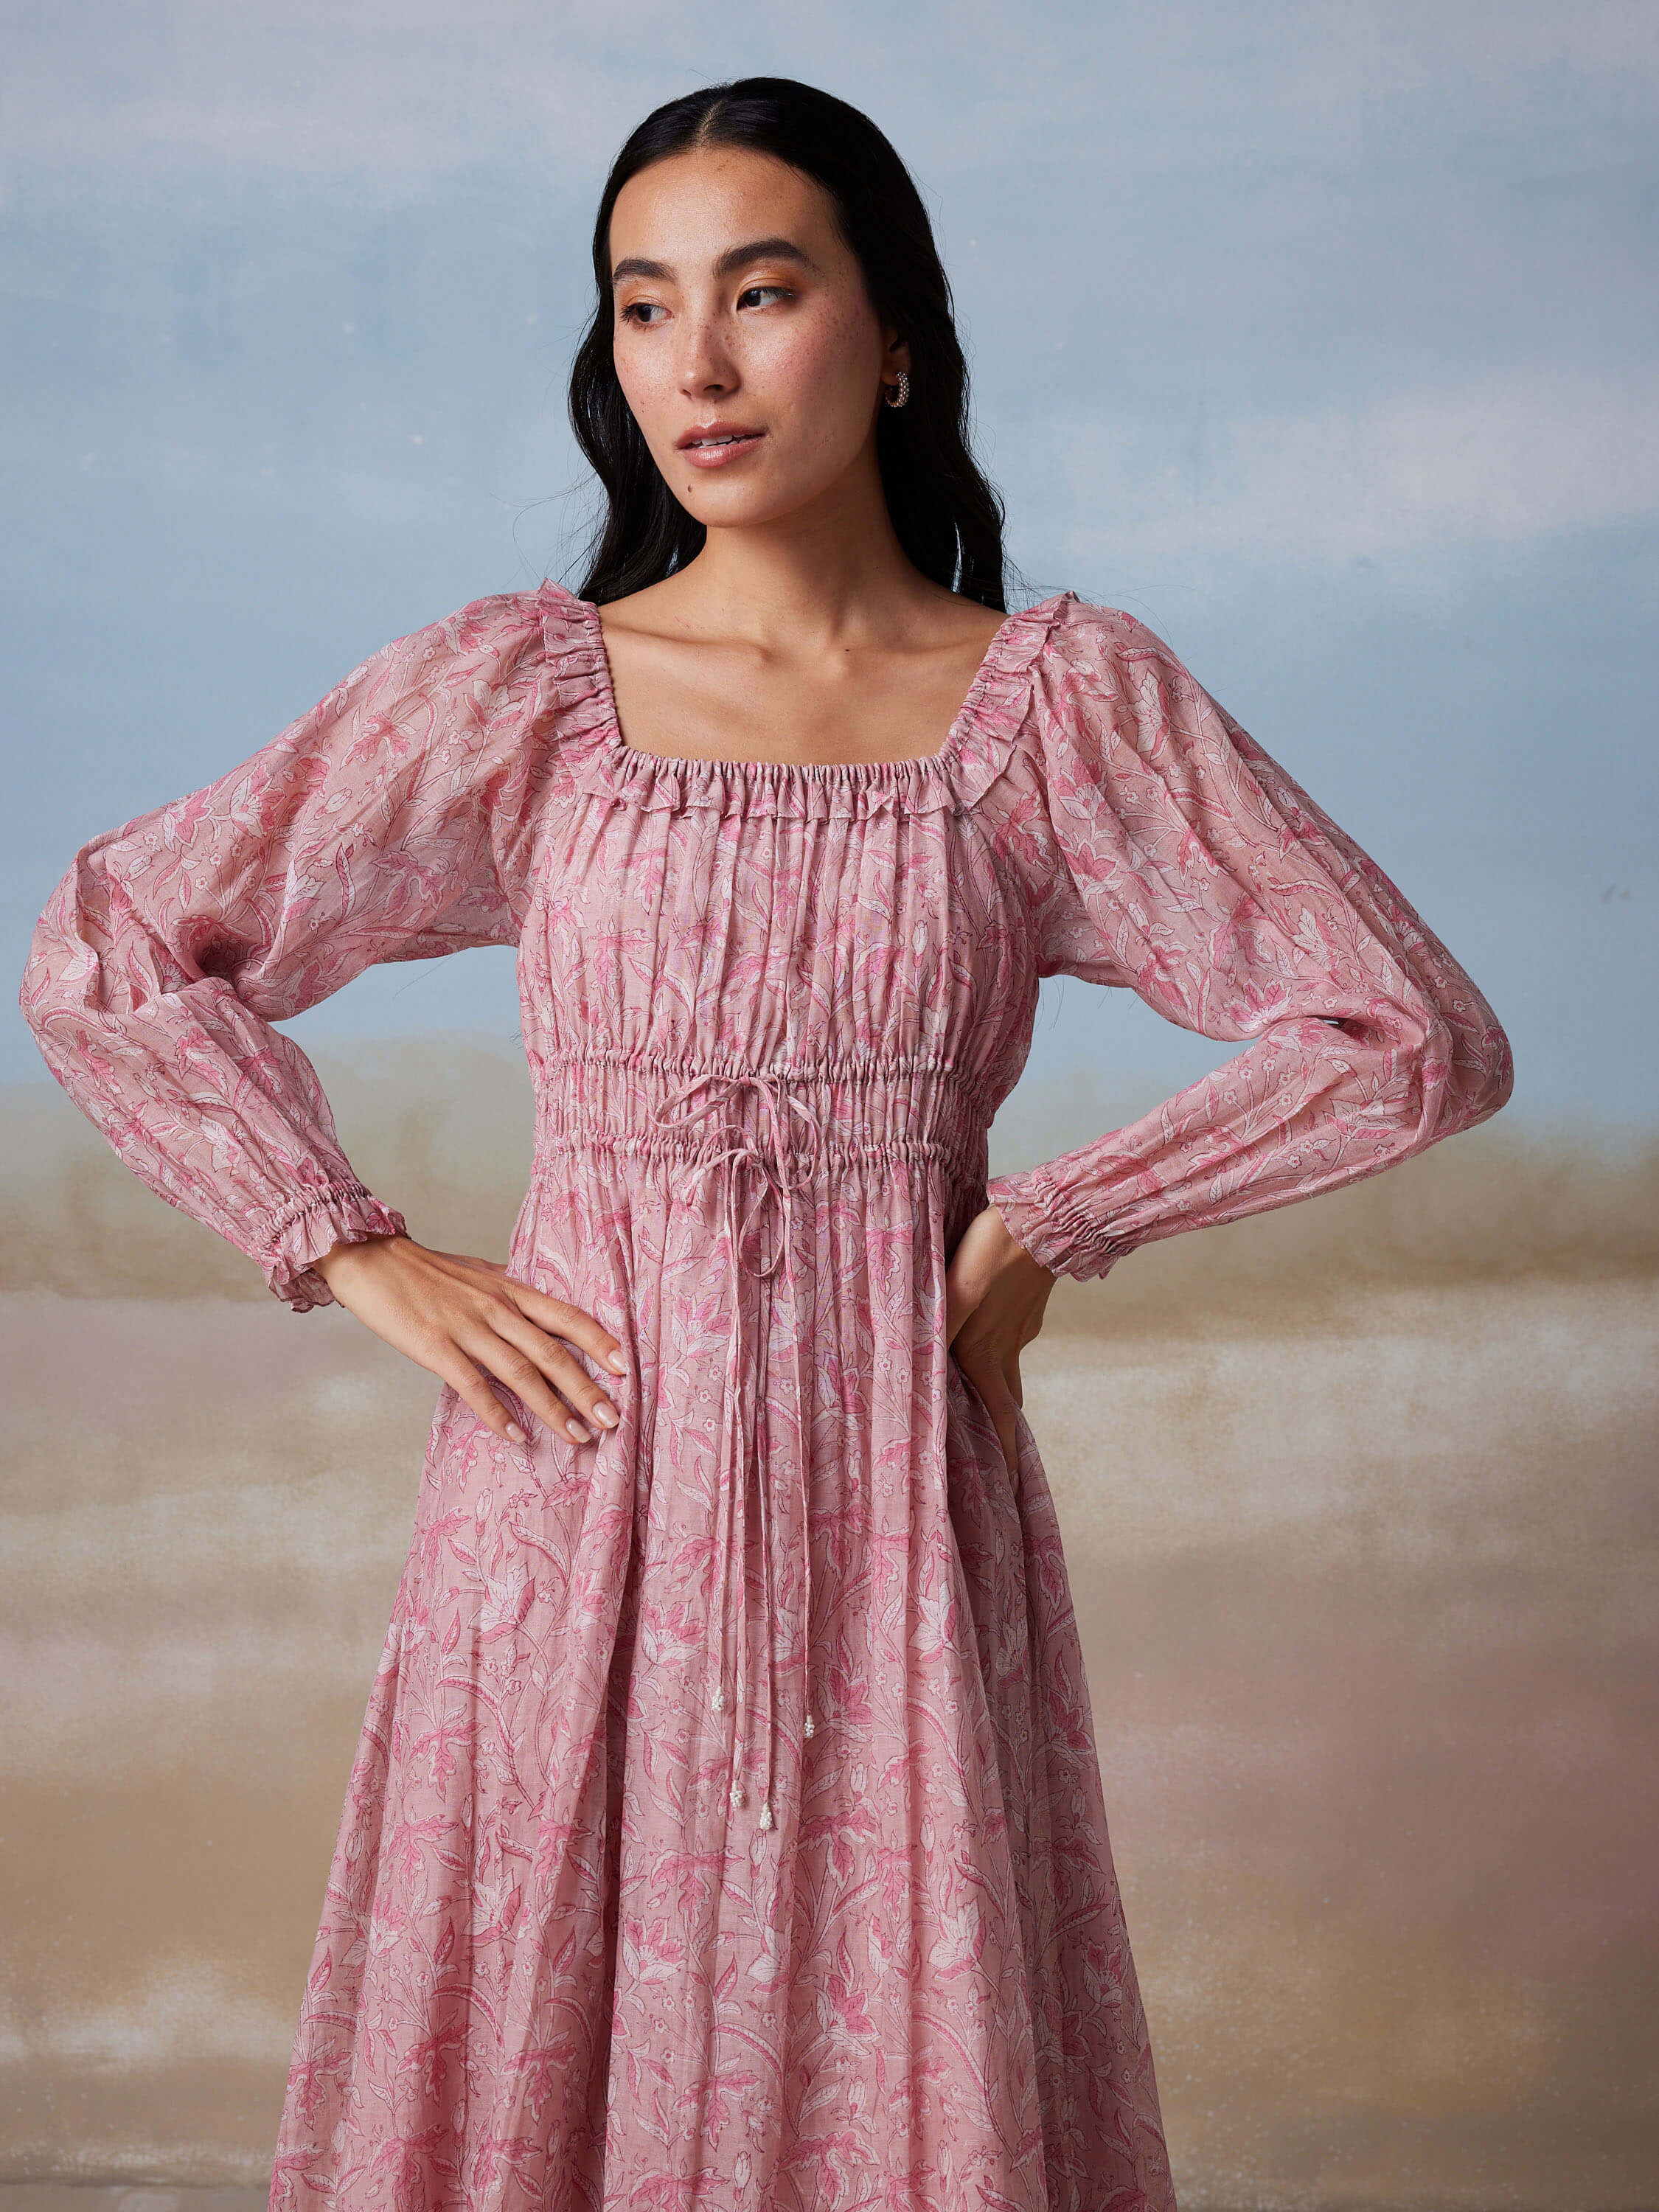 Woman in pink long-sleeve dress with floral pattern, standing against blue background.